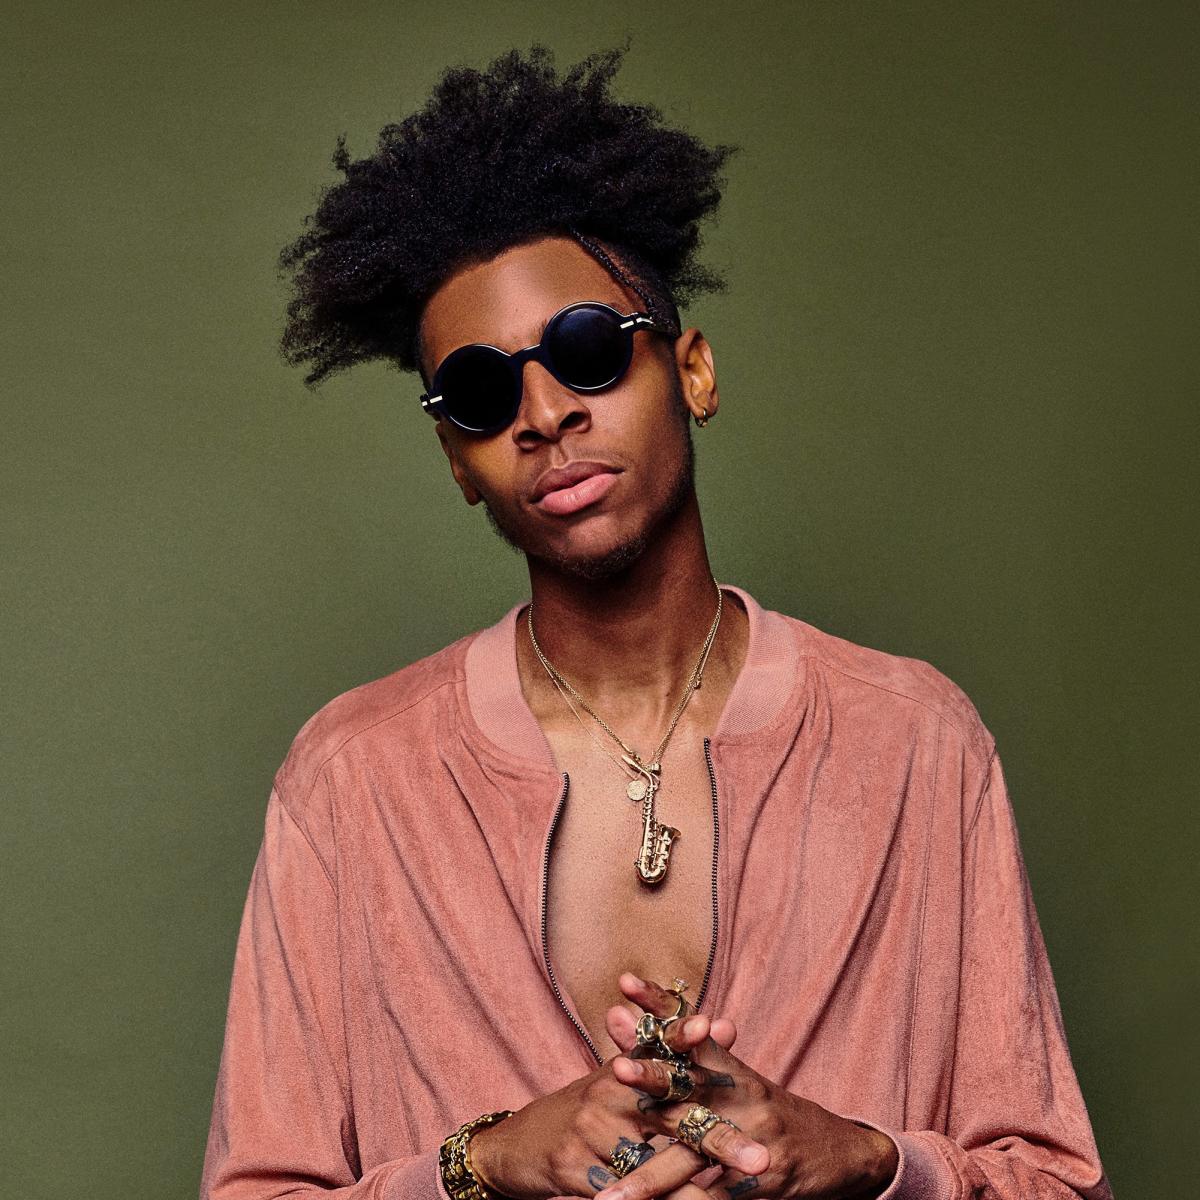 Masego, the Ultra-Smooth “TrapHouseJazz” Singer, Is Ready for His Breakout